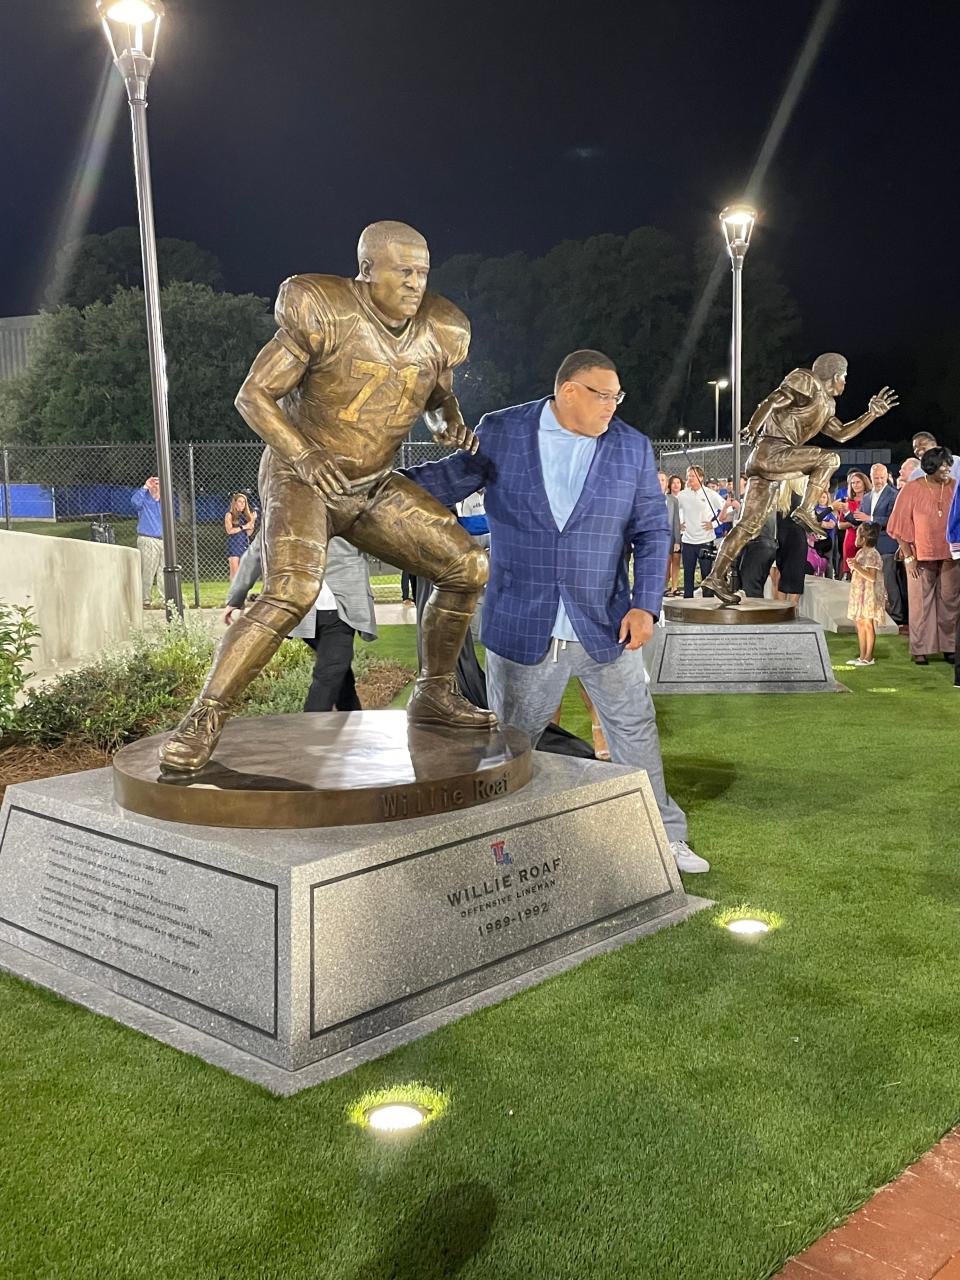 Louisiana Tech Hall of Famer Willie Roaf stands next to his new statute at Joe Aillet Stadium.